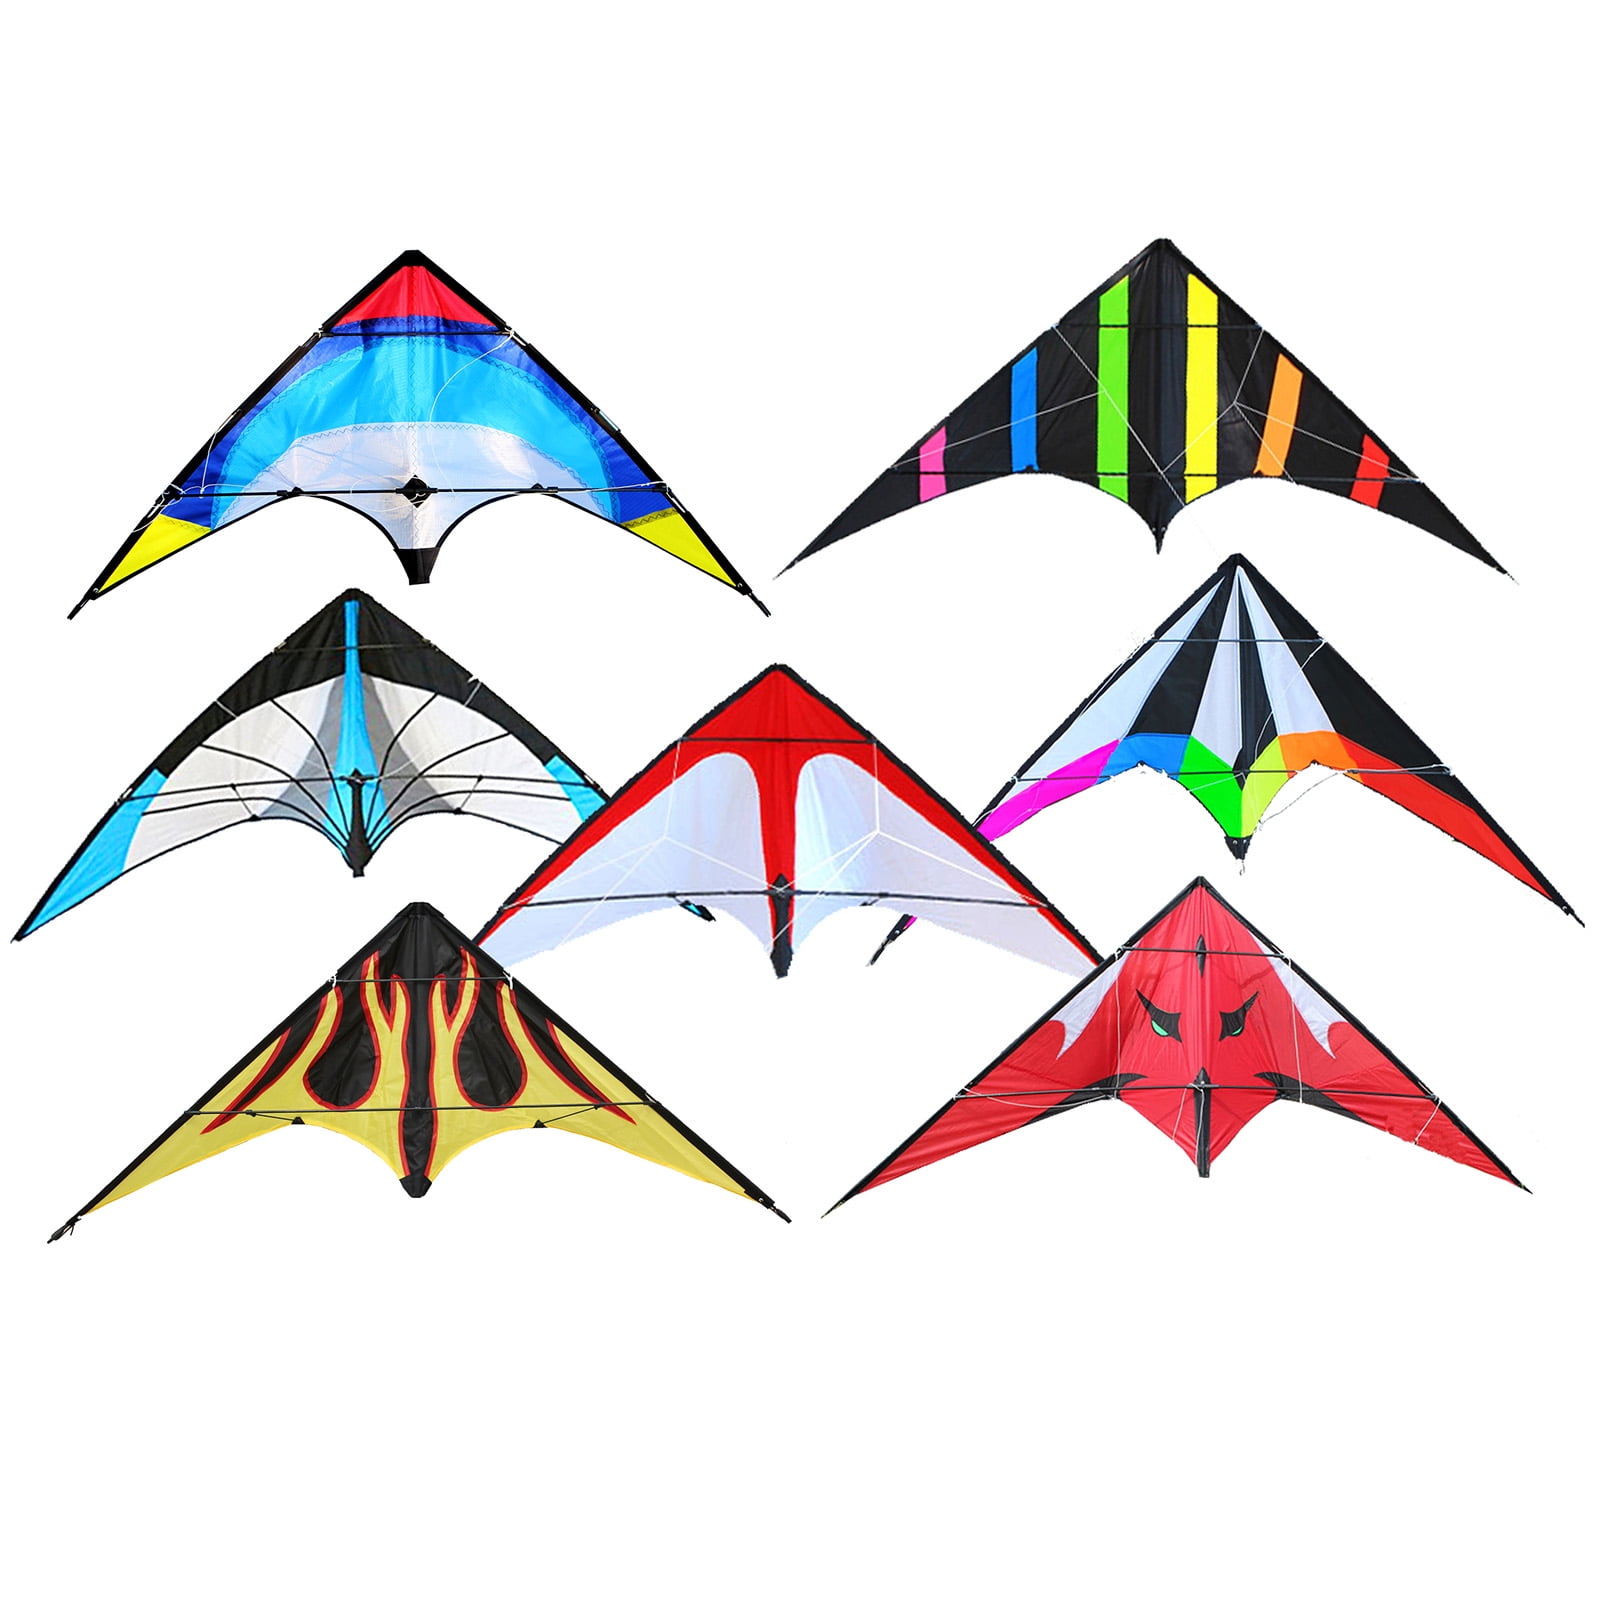 New 48-Inch 1.2m Dual Line Flame Stunt Kite Outdoor fun Sport Toys for Beginner 